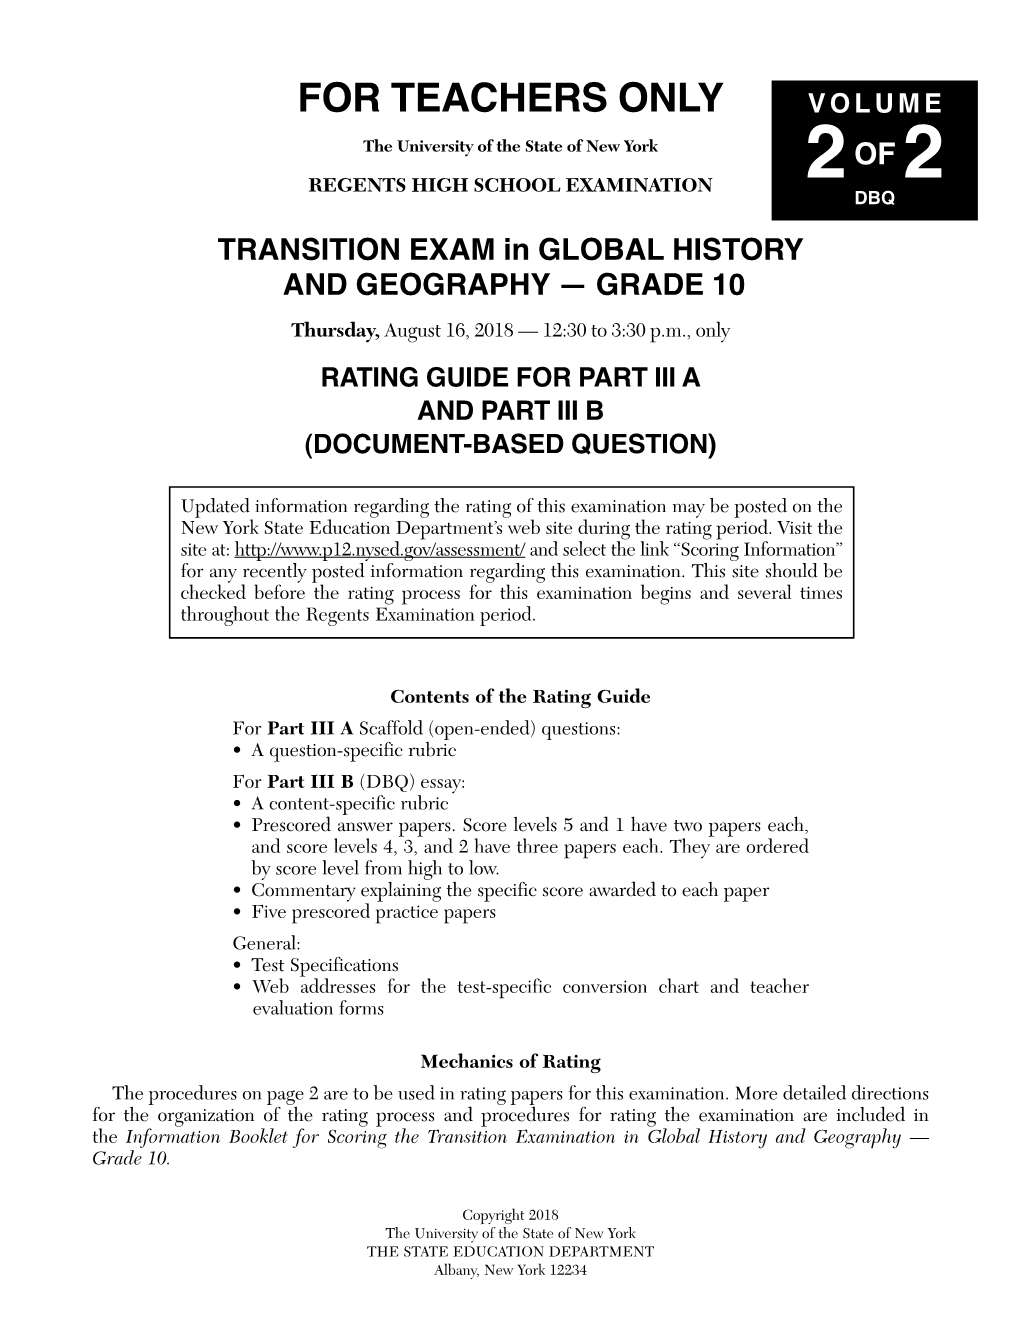 DBQ TRANSITION EXAM in GLOBAL HISTORY and GEOGRAPHY — GRADE 10